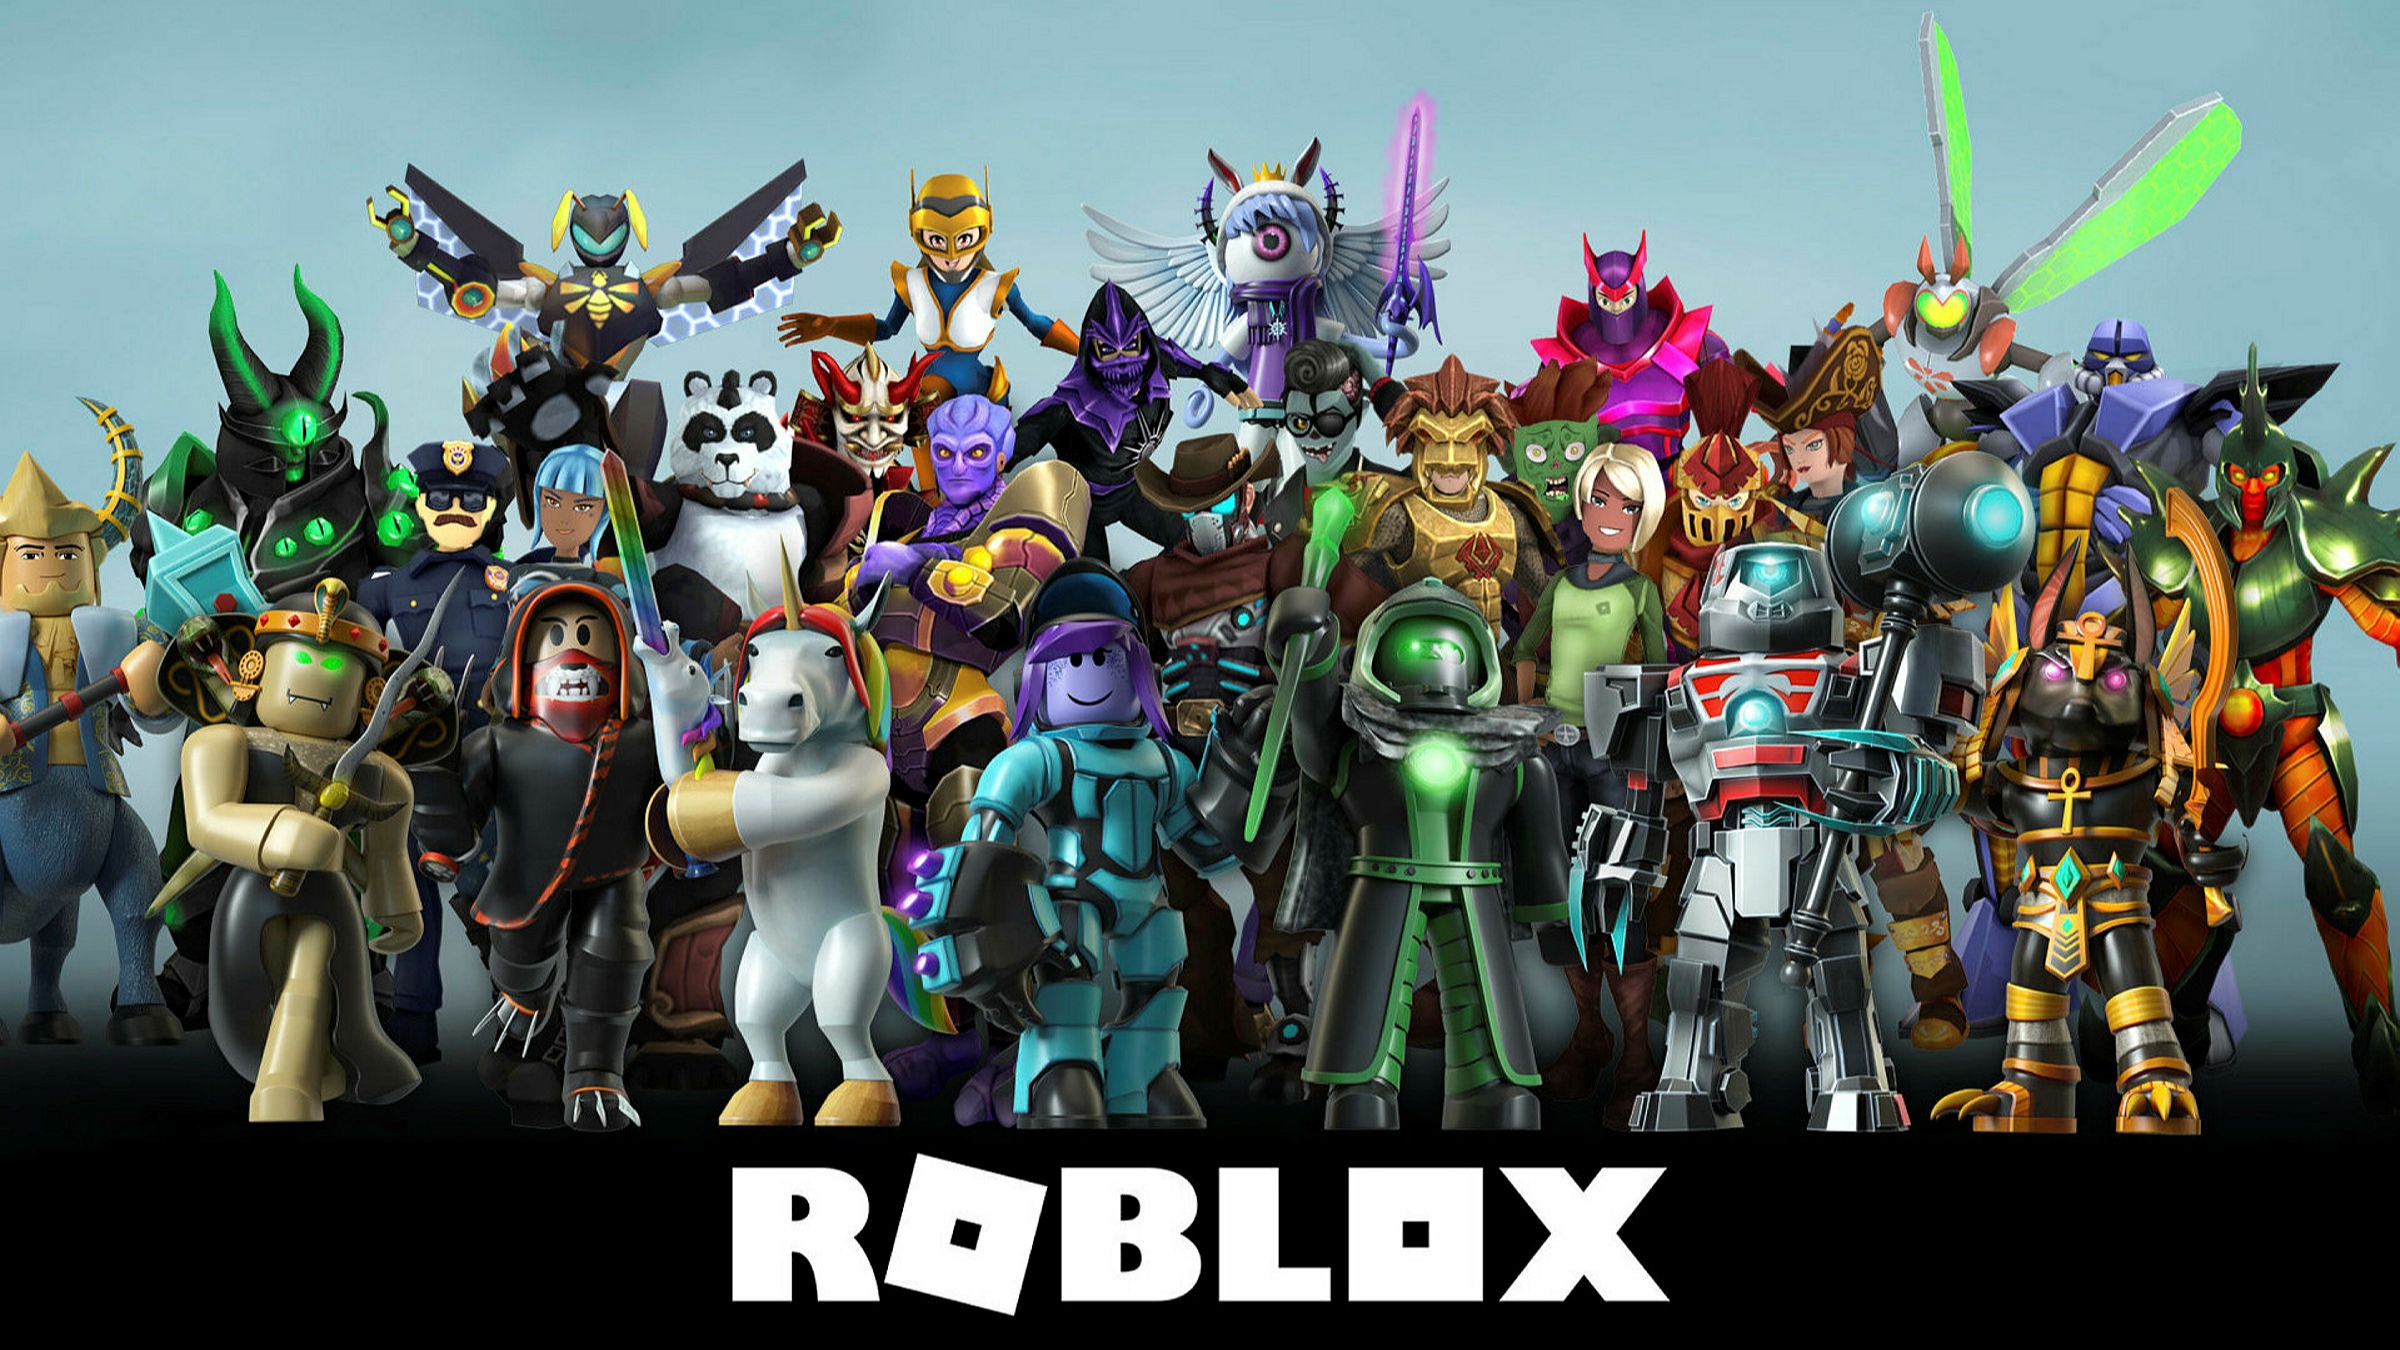 Video Games Top List Of Pocket Money Spending In Lockdown Financial Times - good roblox survival games 2019